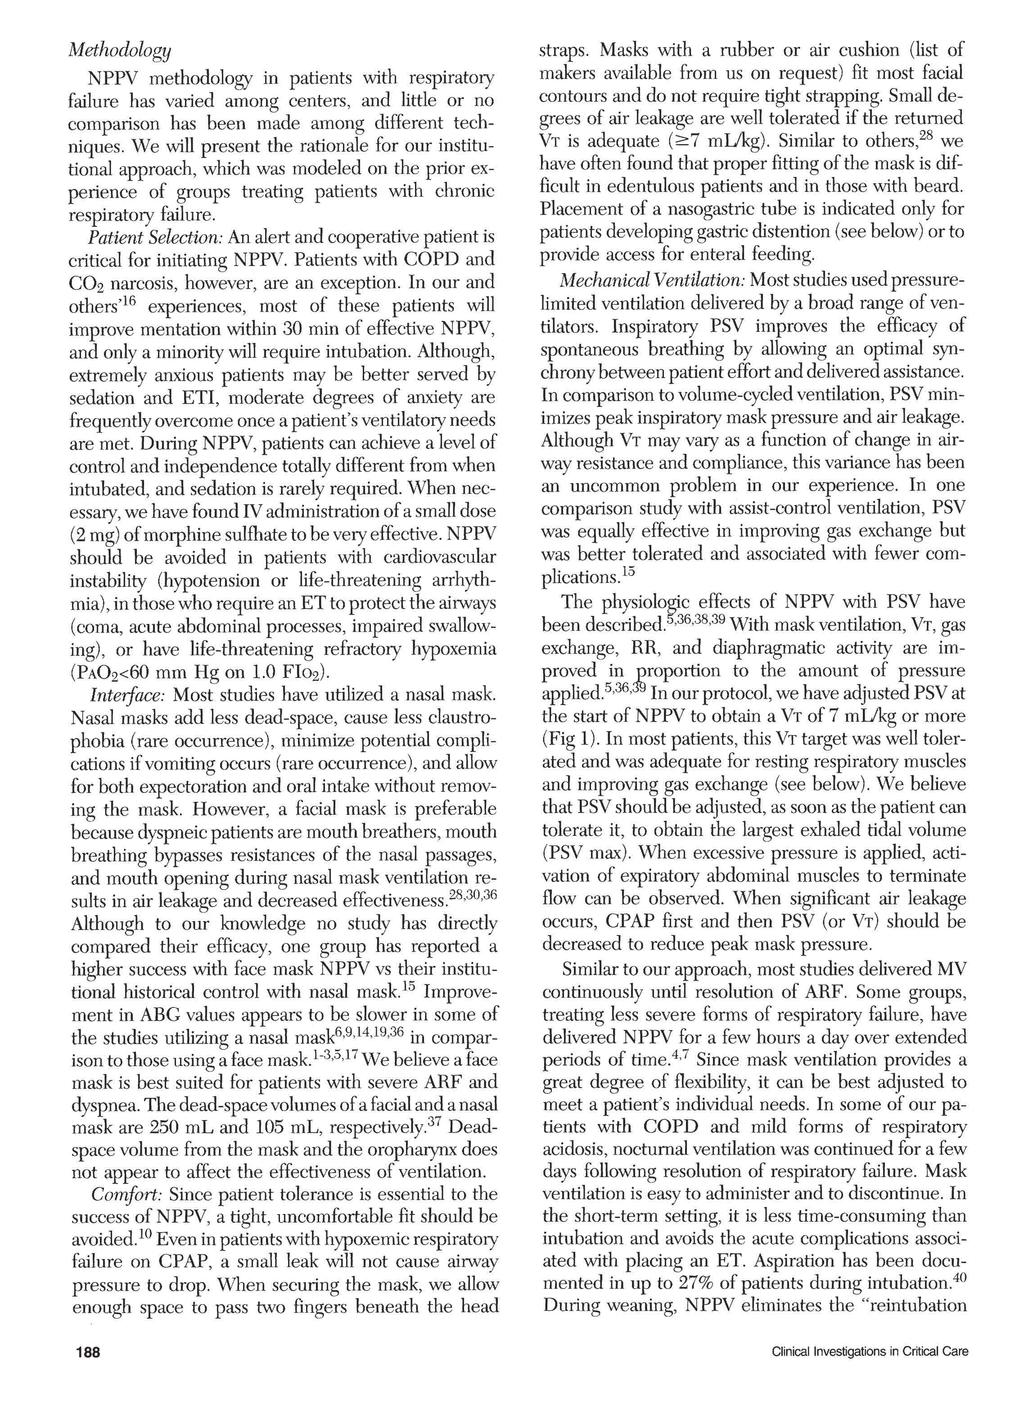 Methodology NPPV methodology in patients with respiratory failure has varied among centers, and little or no comparison has been made among different techniques.